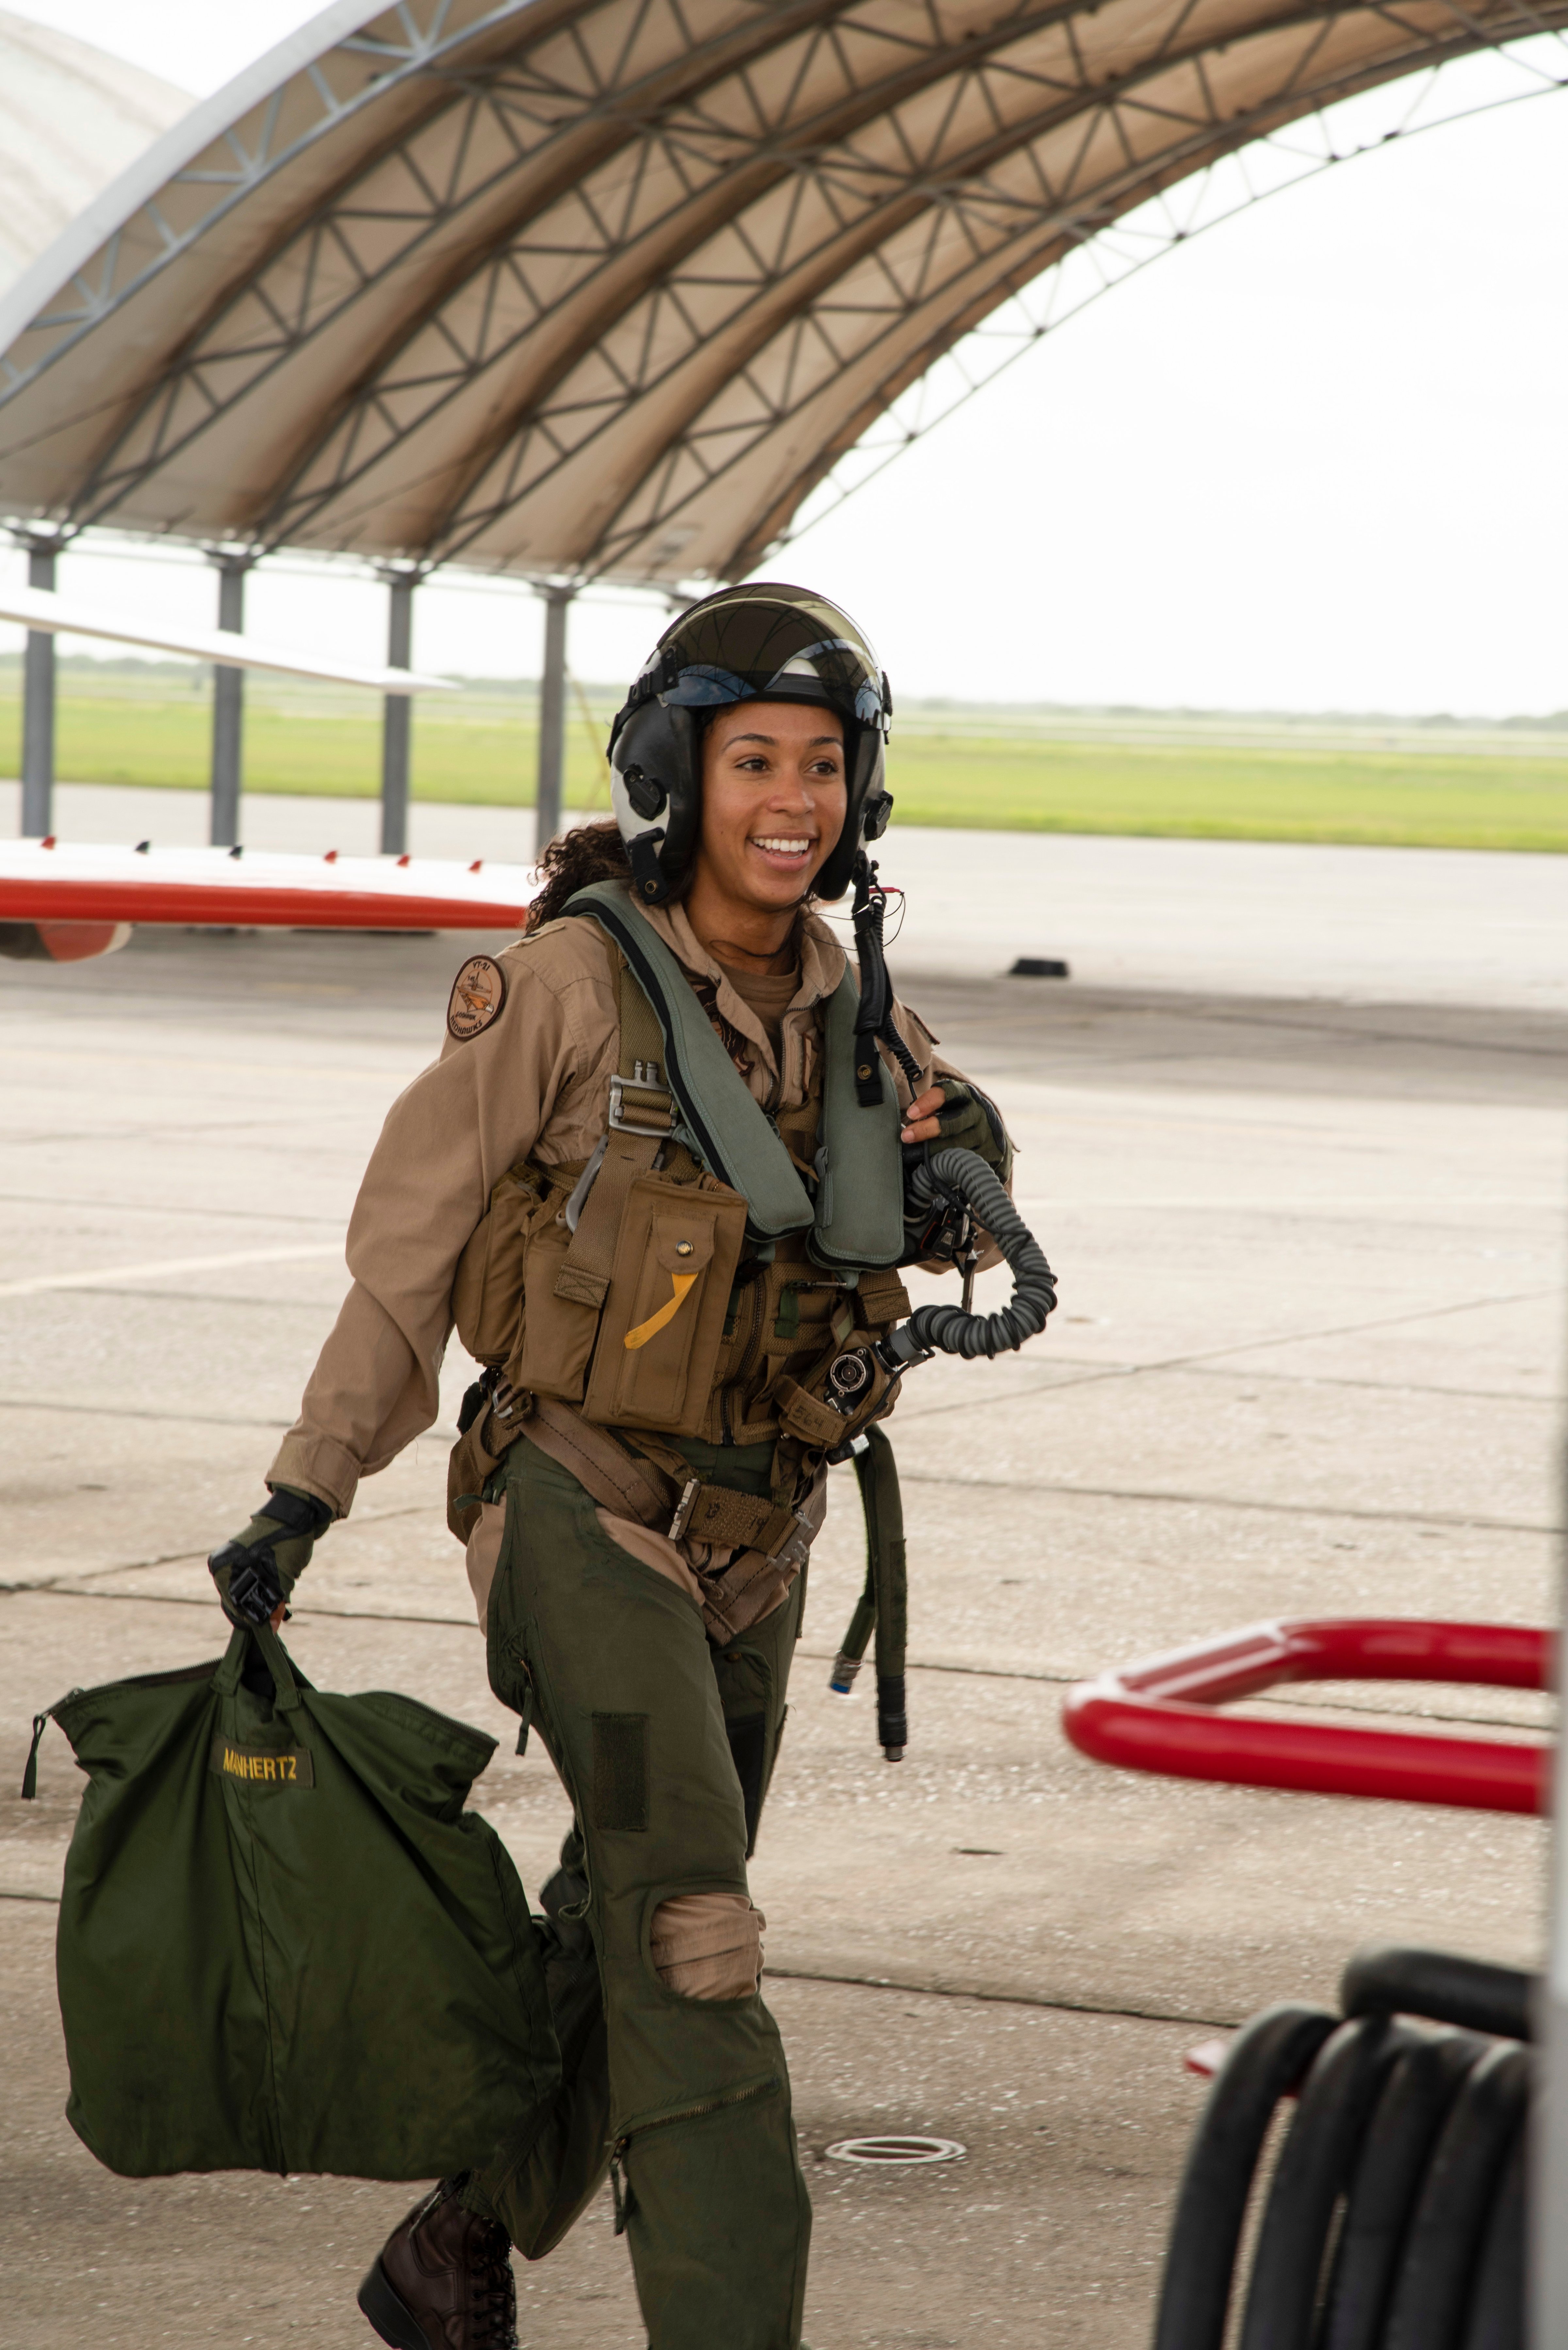 Student Naval Aviator Lt. j.g. Madeline Swegle, assigned to the Redhawks of Training Squadron (VT) 21 at Naval Air Station Kingsville, Texas, exits a T-45C Goshawk training aircraft following her final flight to complete the undergraduate Tactical Air (Strike) pilot training syllabus, July 7. Swegle is the U.S. Navy's first known Black female strike aviator and will receive her Wings of Gold during a ceremony July 31. (U.S. Navy photo by Anne Owens/Released)